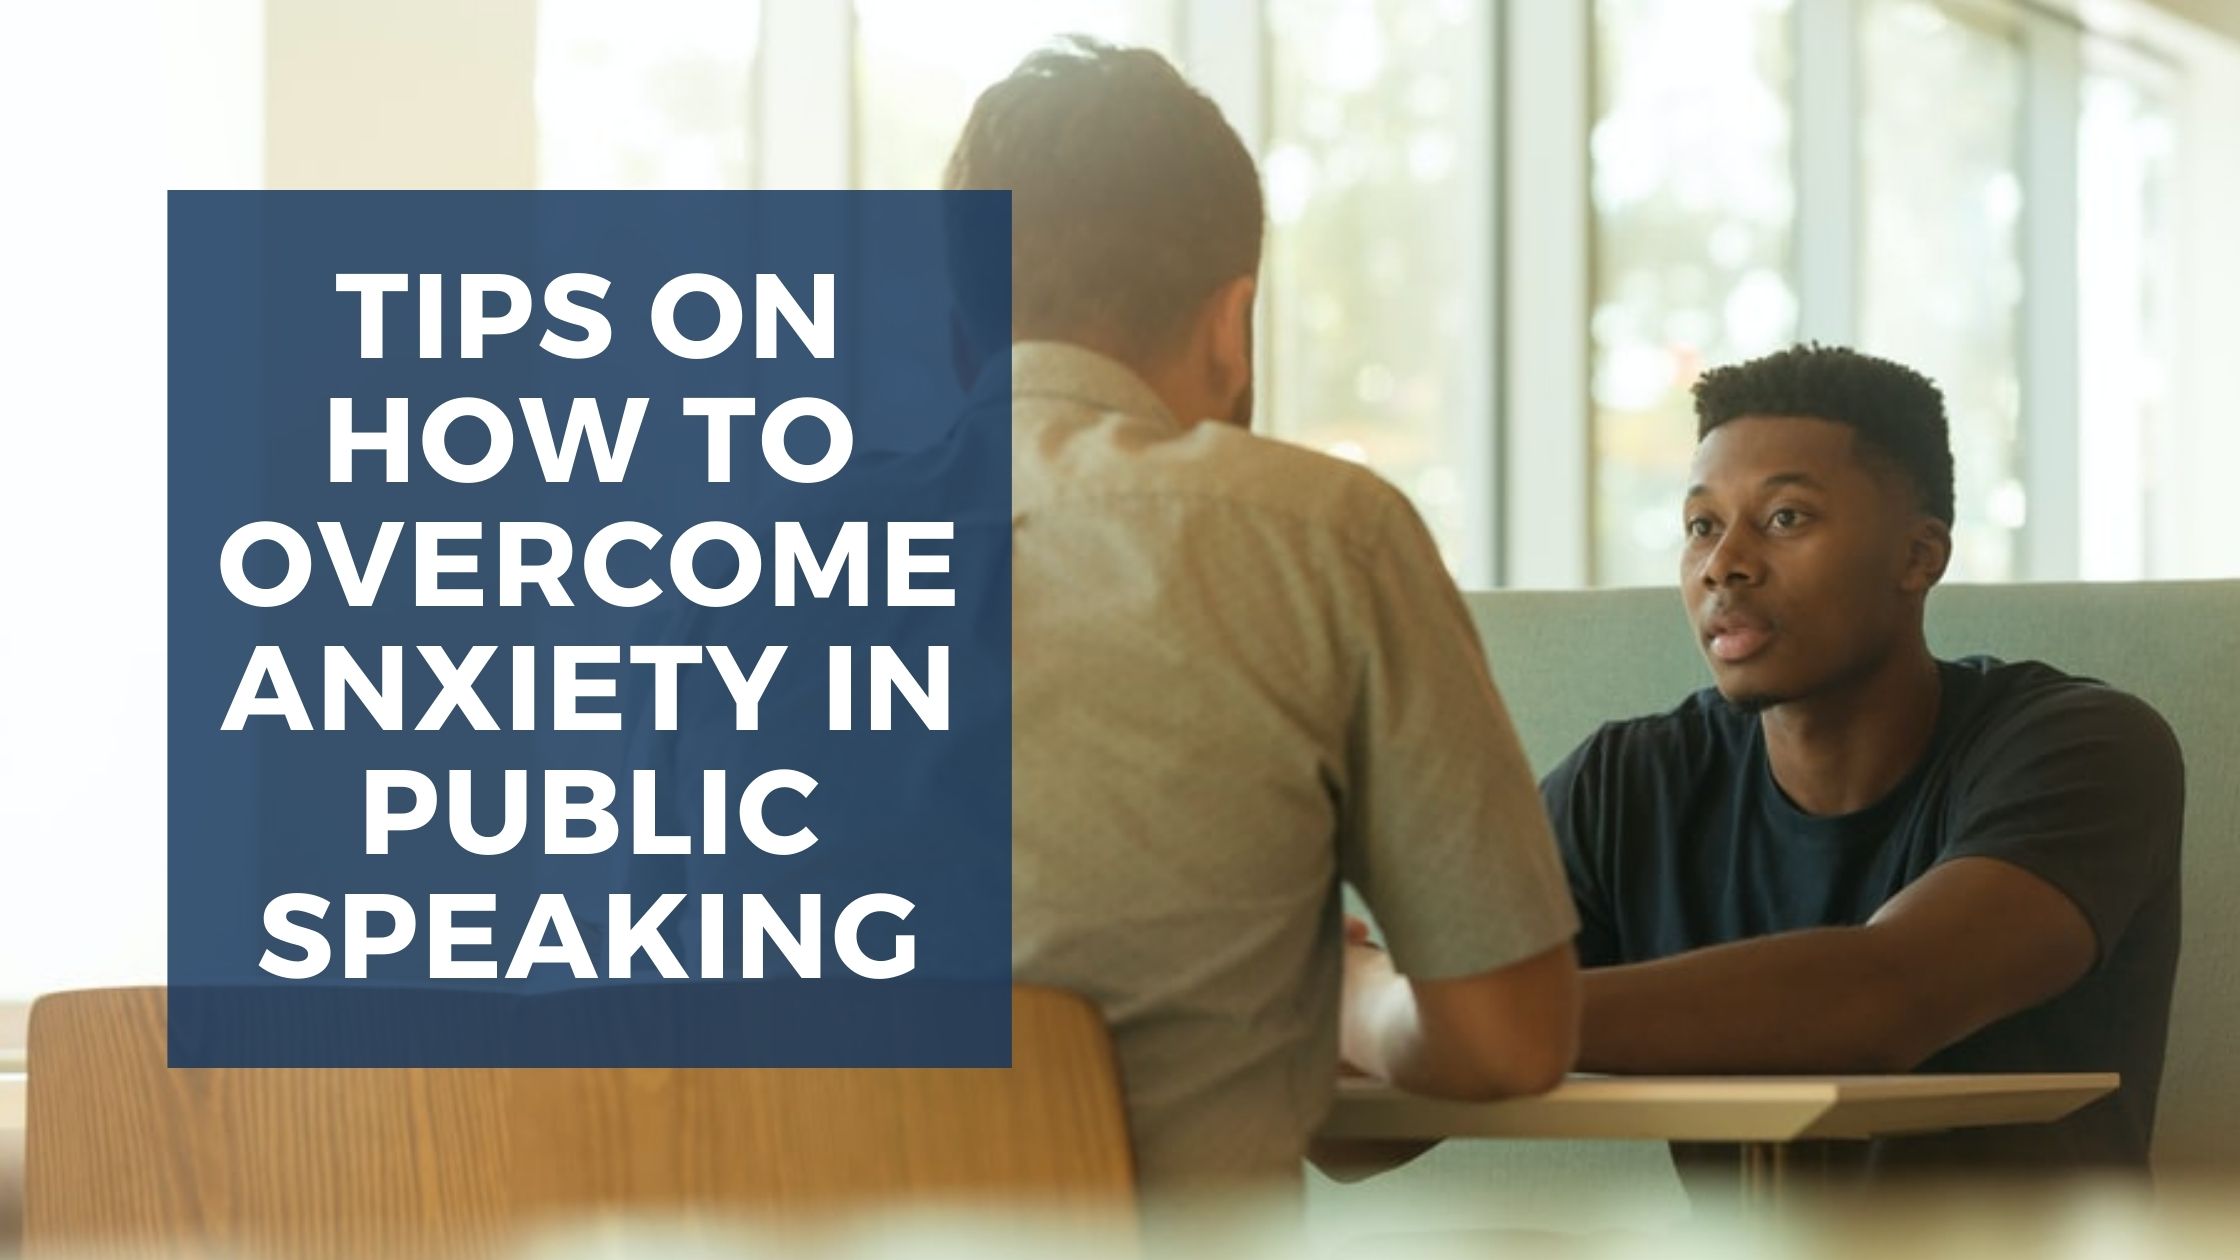 Some more tips on how to overcome anxiety in public speaking